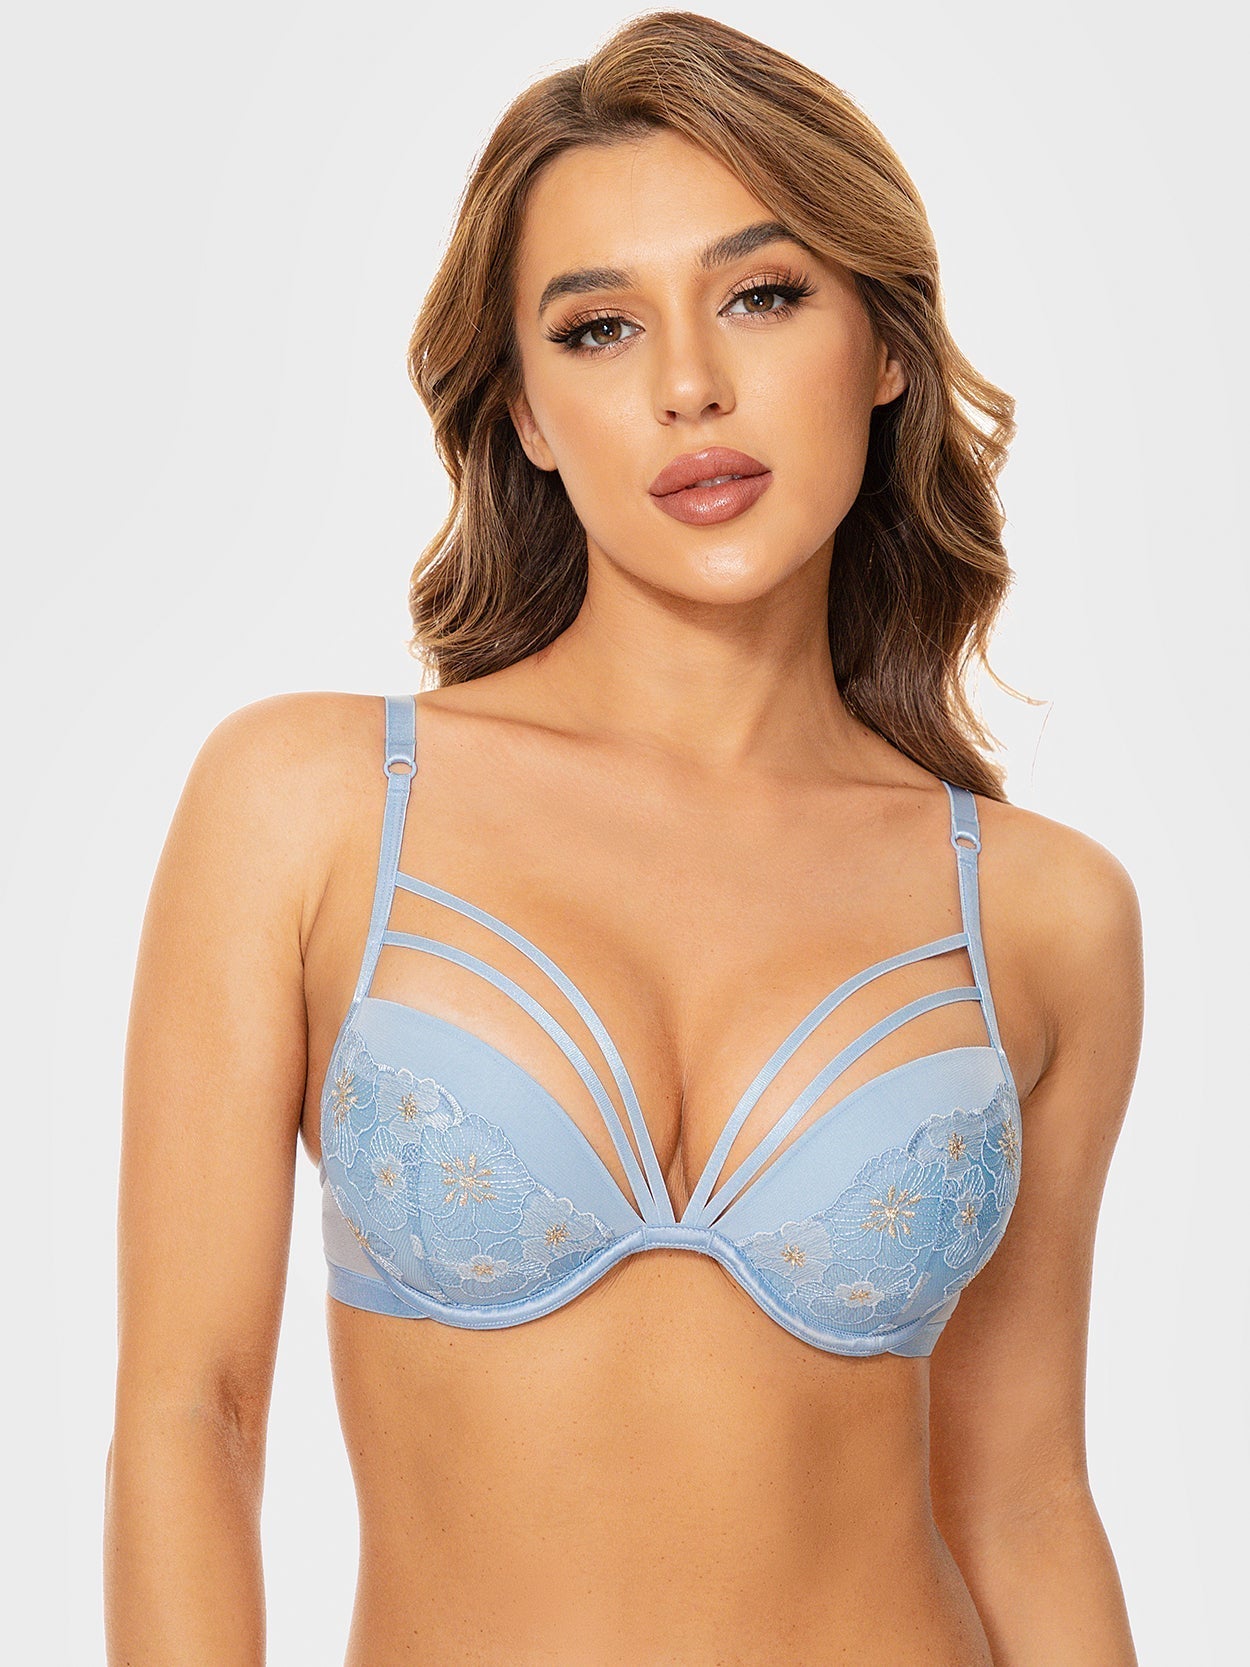 Floral Embroidery Push up Bra Lenceria See Through Lingerie